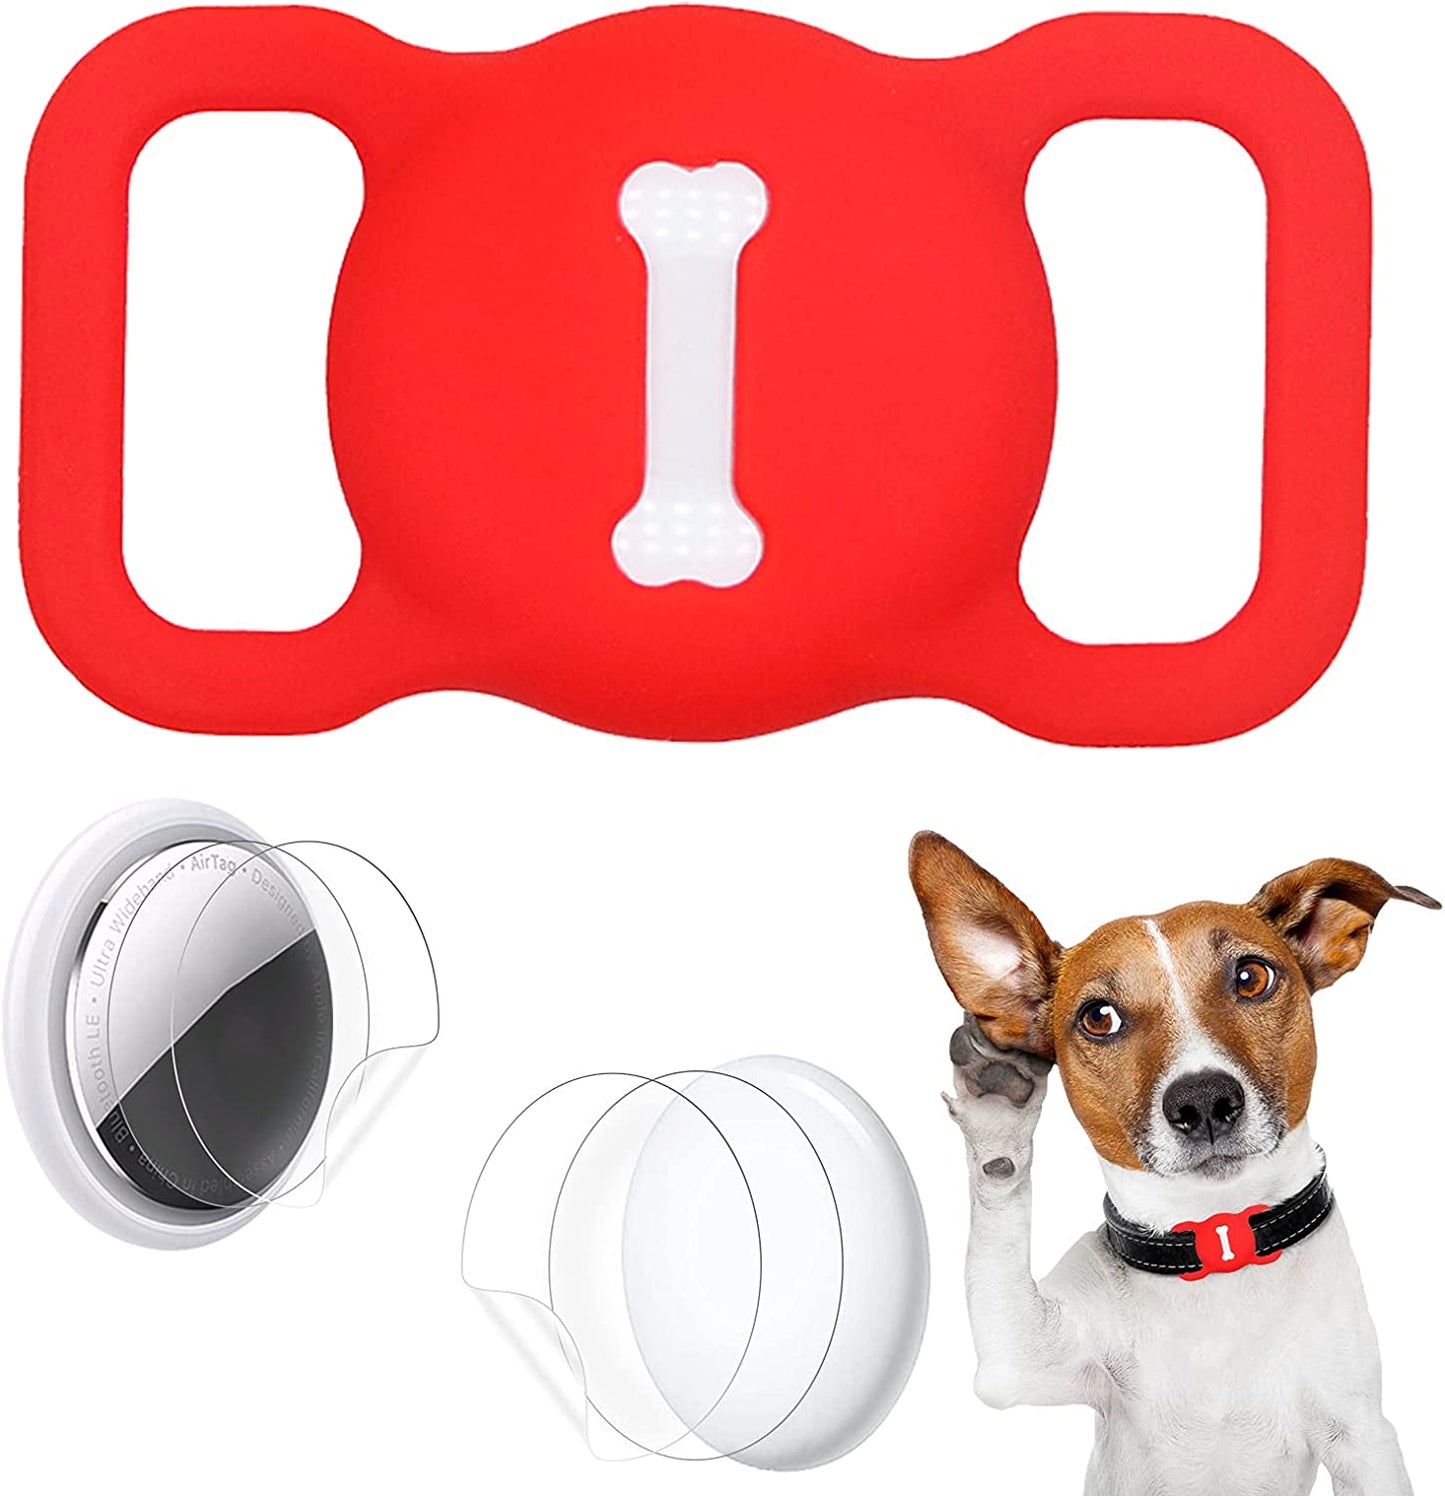 Protective Case Compatible for Apple Airtags for Dog Cat Collar Pet Loop Holder, Airtag Holder Accessories with Screen Protectors, Air Tag Silicone Cover for Pet Collar